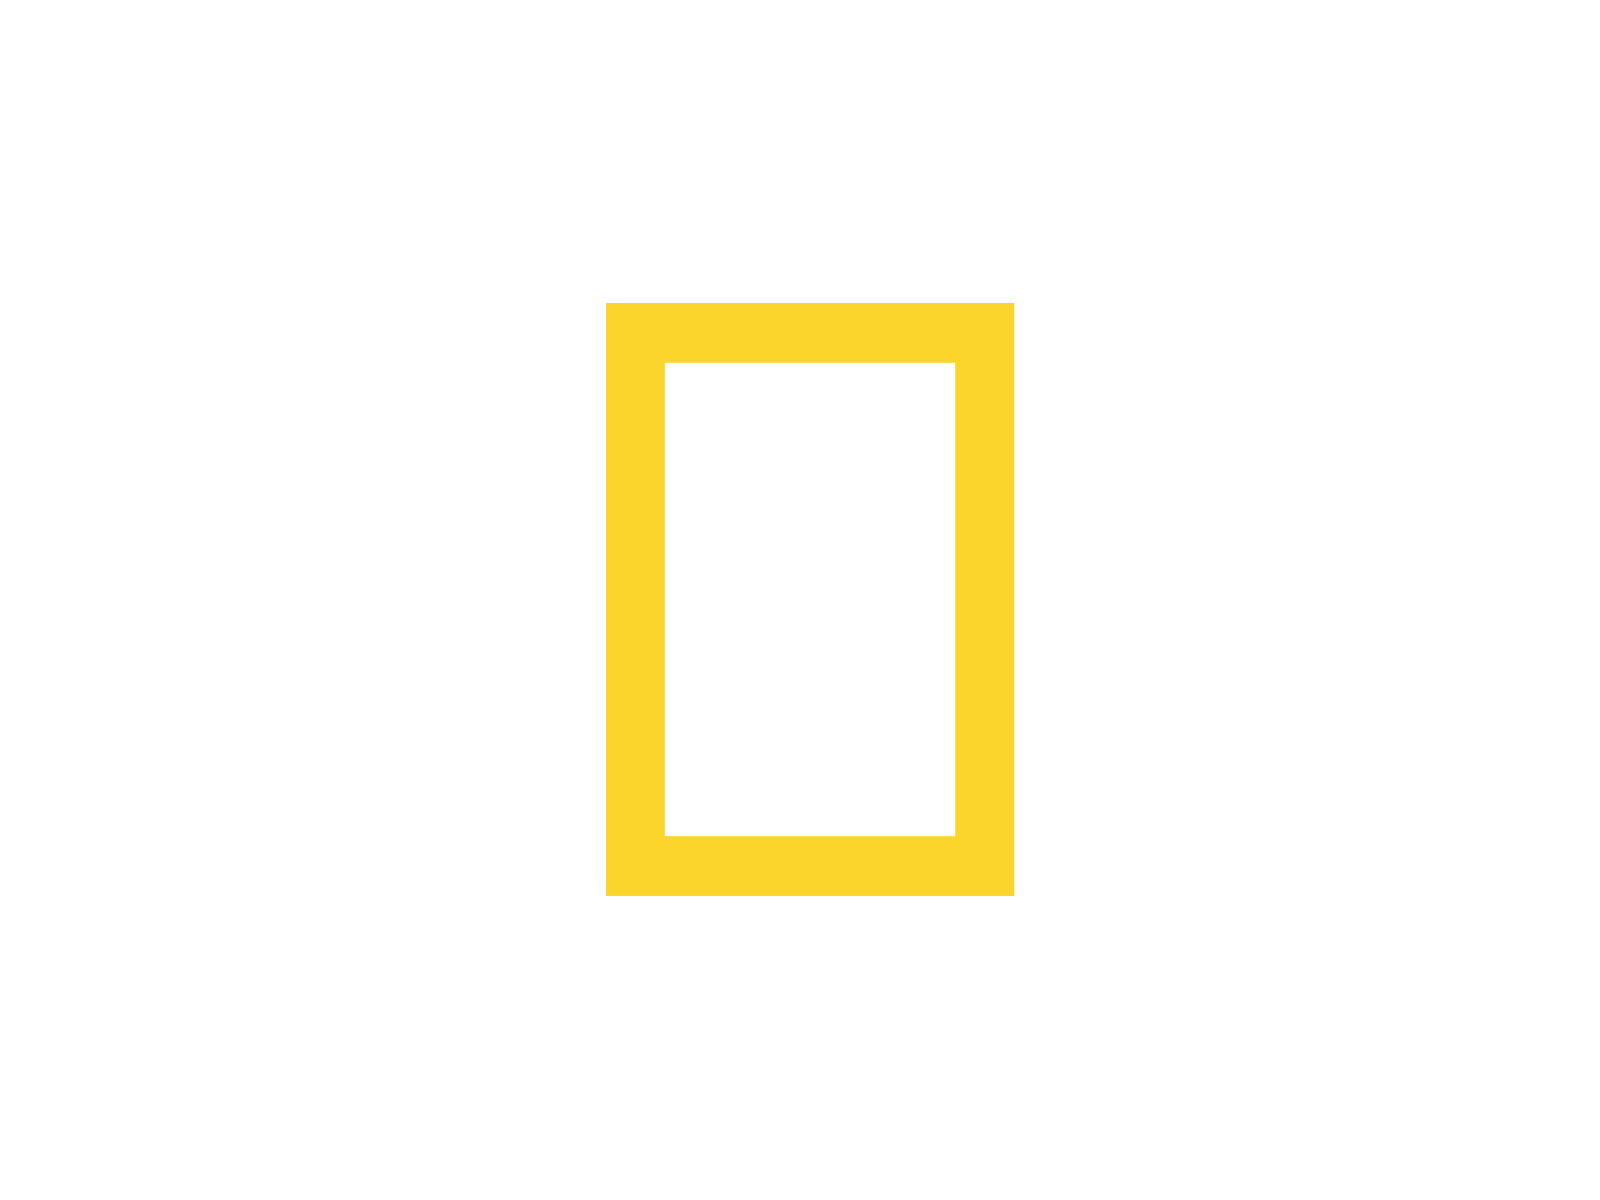 Yellow Square with Channel Logo - National Geographic logo | Logok